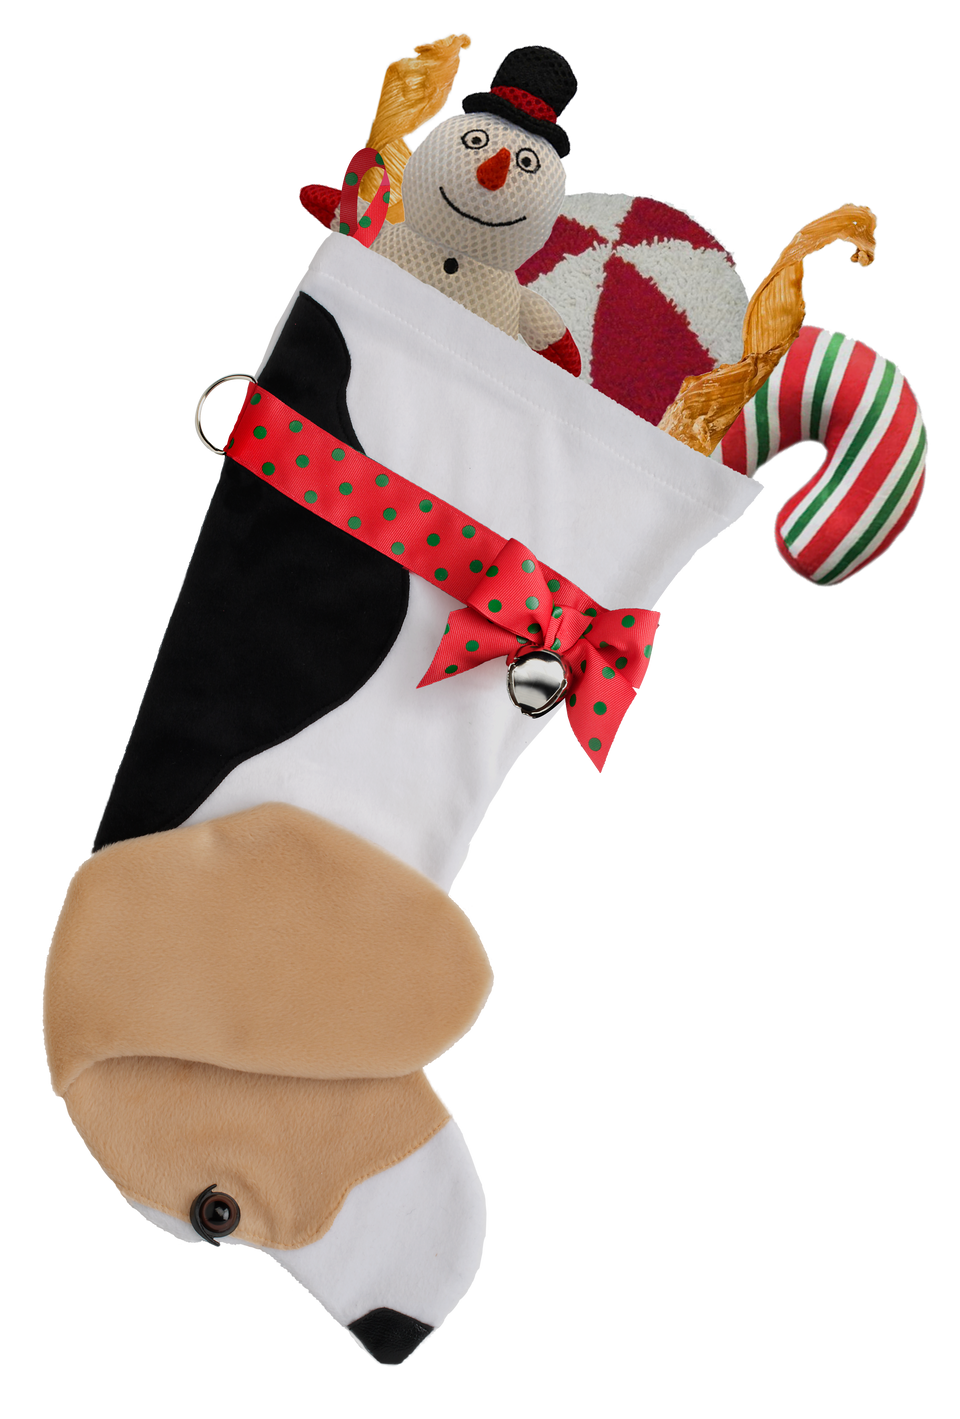 This Beagle shaped Christmas dog stocking is the perfect gift for stuffing toys and treats into to spoil your fur baby for Christmas, or whatever holiday you celebrate!